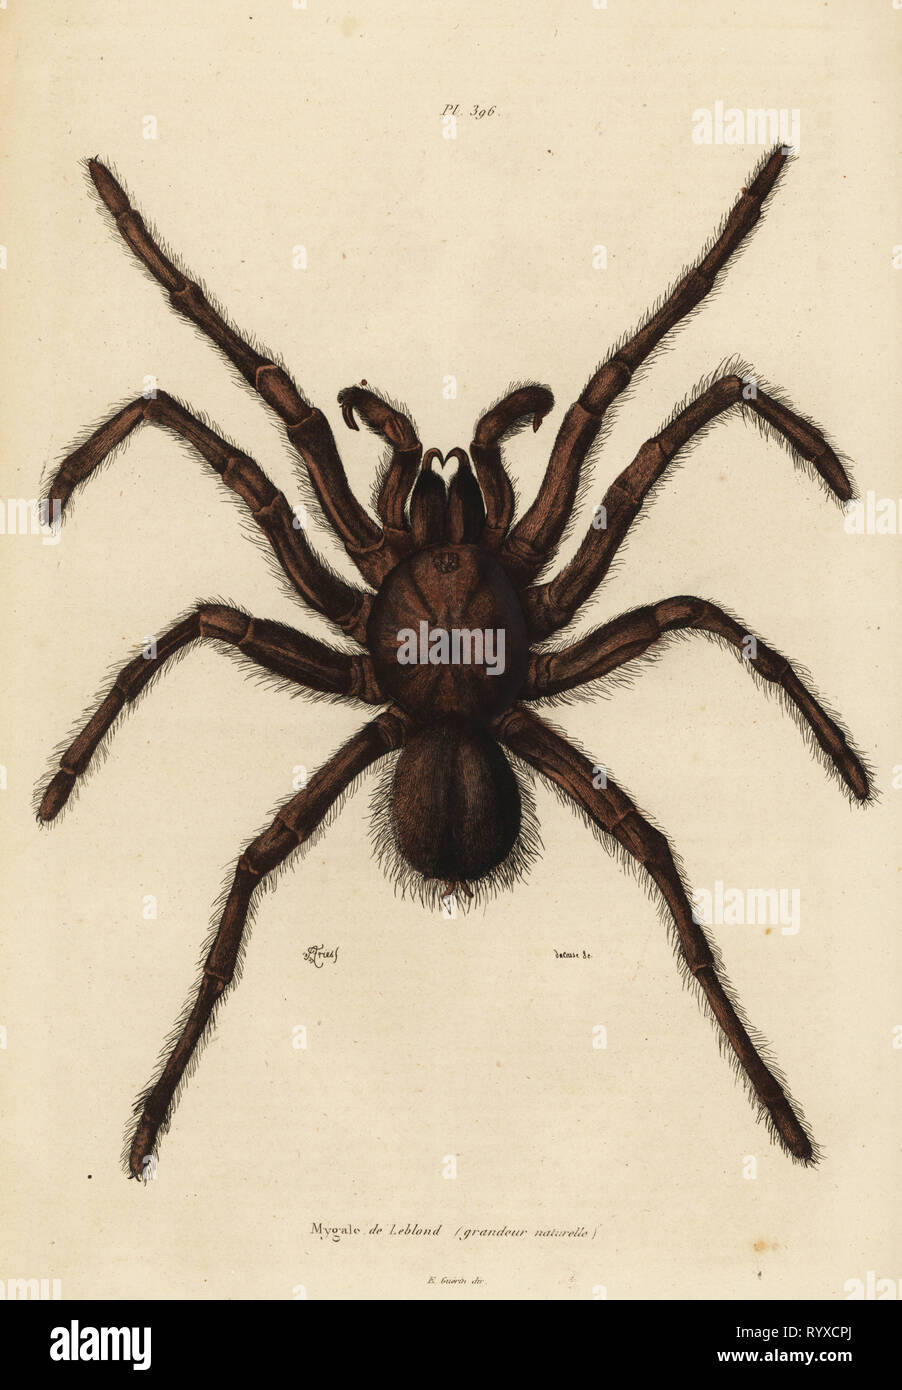 Goliath birdeater spider, Theraphosa blondi. Mygale de Leblond, grandeur naturelle. Handcoloured steel engraving by du Casse after an illustration by Adolph Fries from Felix-Edouard Guerin-Meneville's Dictionnaire Pittoresque d'Histoire Naturelle (Picturesque Dictionary of Natural History), Paris, 1834-39. Stock Photo